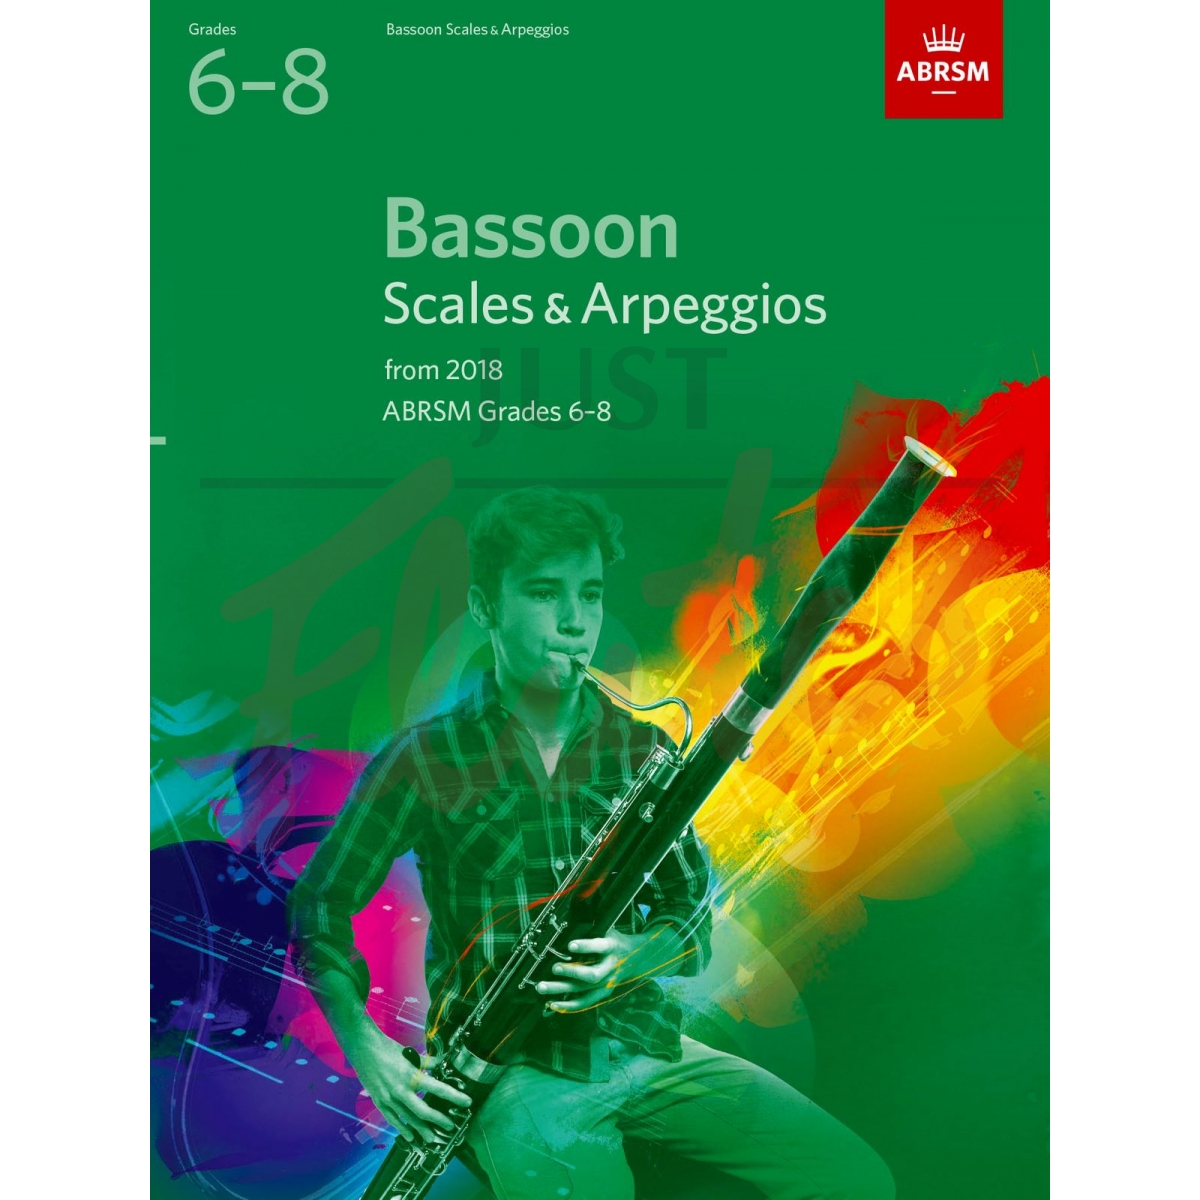 Scales &amp; Arpeggios Grades 6-8 (from 2018) [Bassoon]